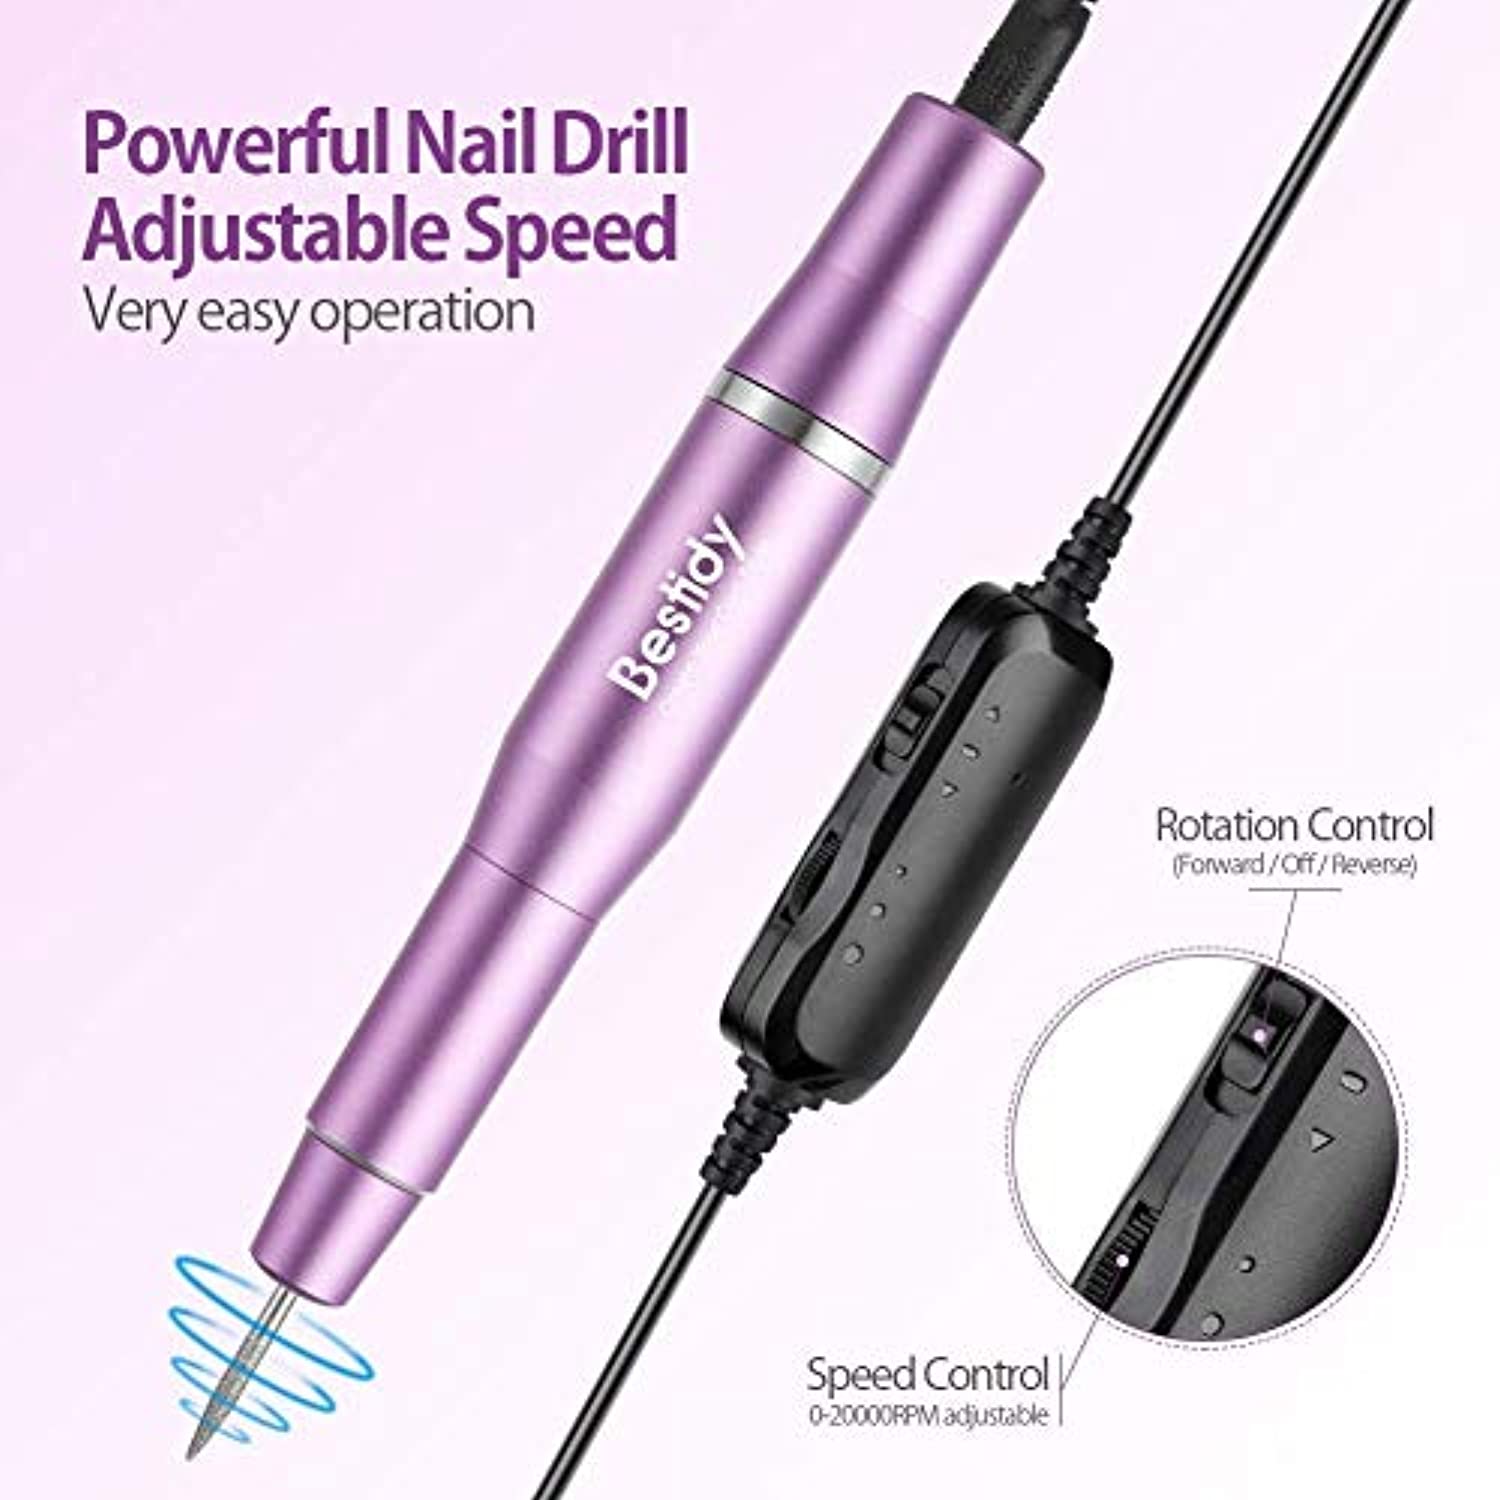 Bestidy Electric Nail Drill Kit,2020 Upgraded Professional Nail File Portable Manicure Pedicure Drill Kit for Acrylic Nails with Manicure Pedicure Brush,Sanding Band,10pcs Tungsten Carbide Bits